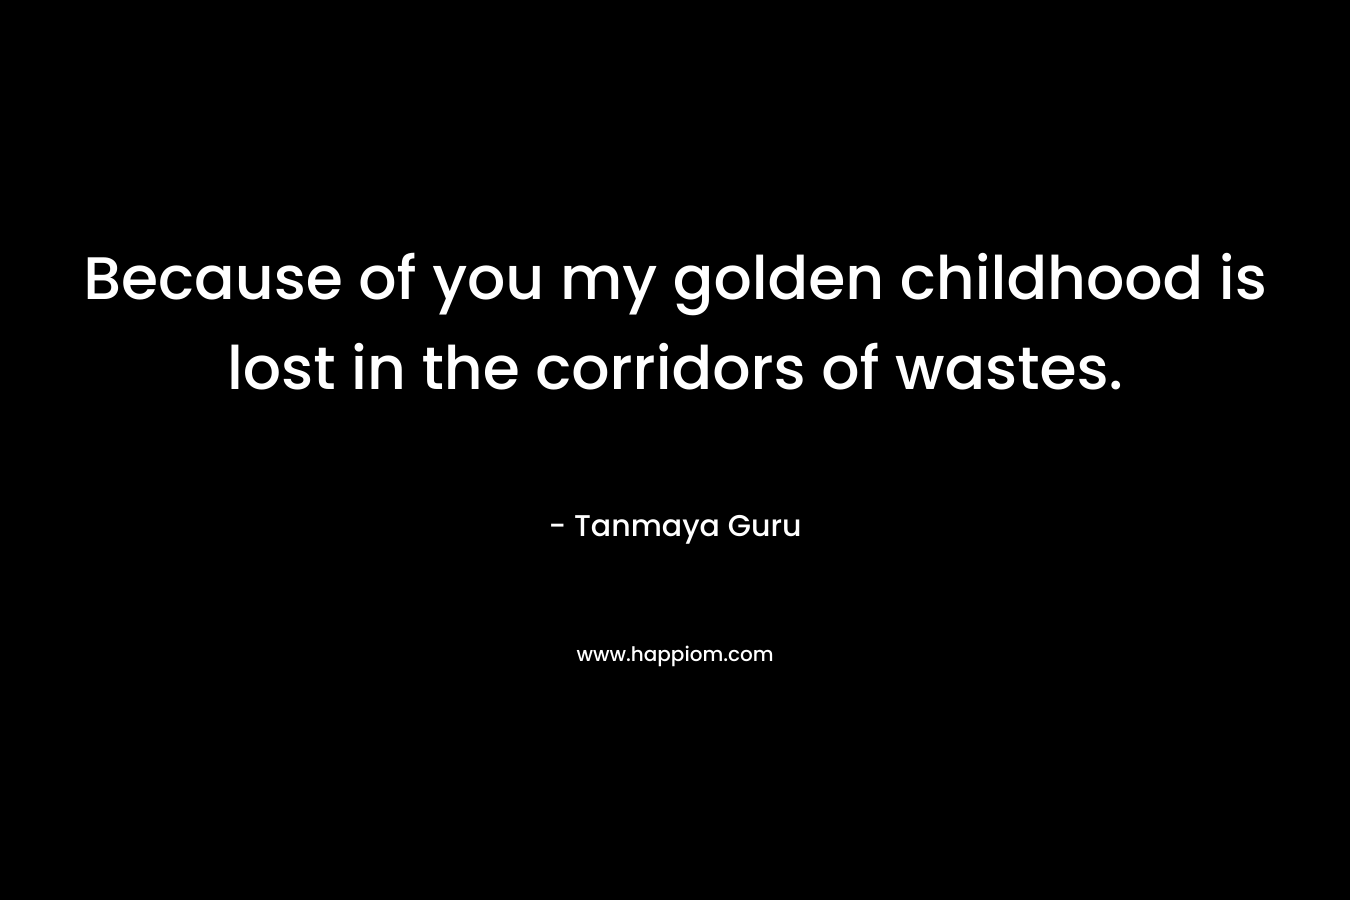 Because of you my golden childhood is lost in the corridors of wastes. – Tanmaya Guru